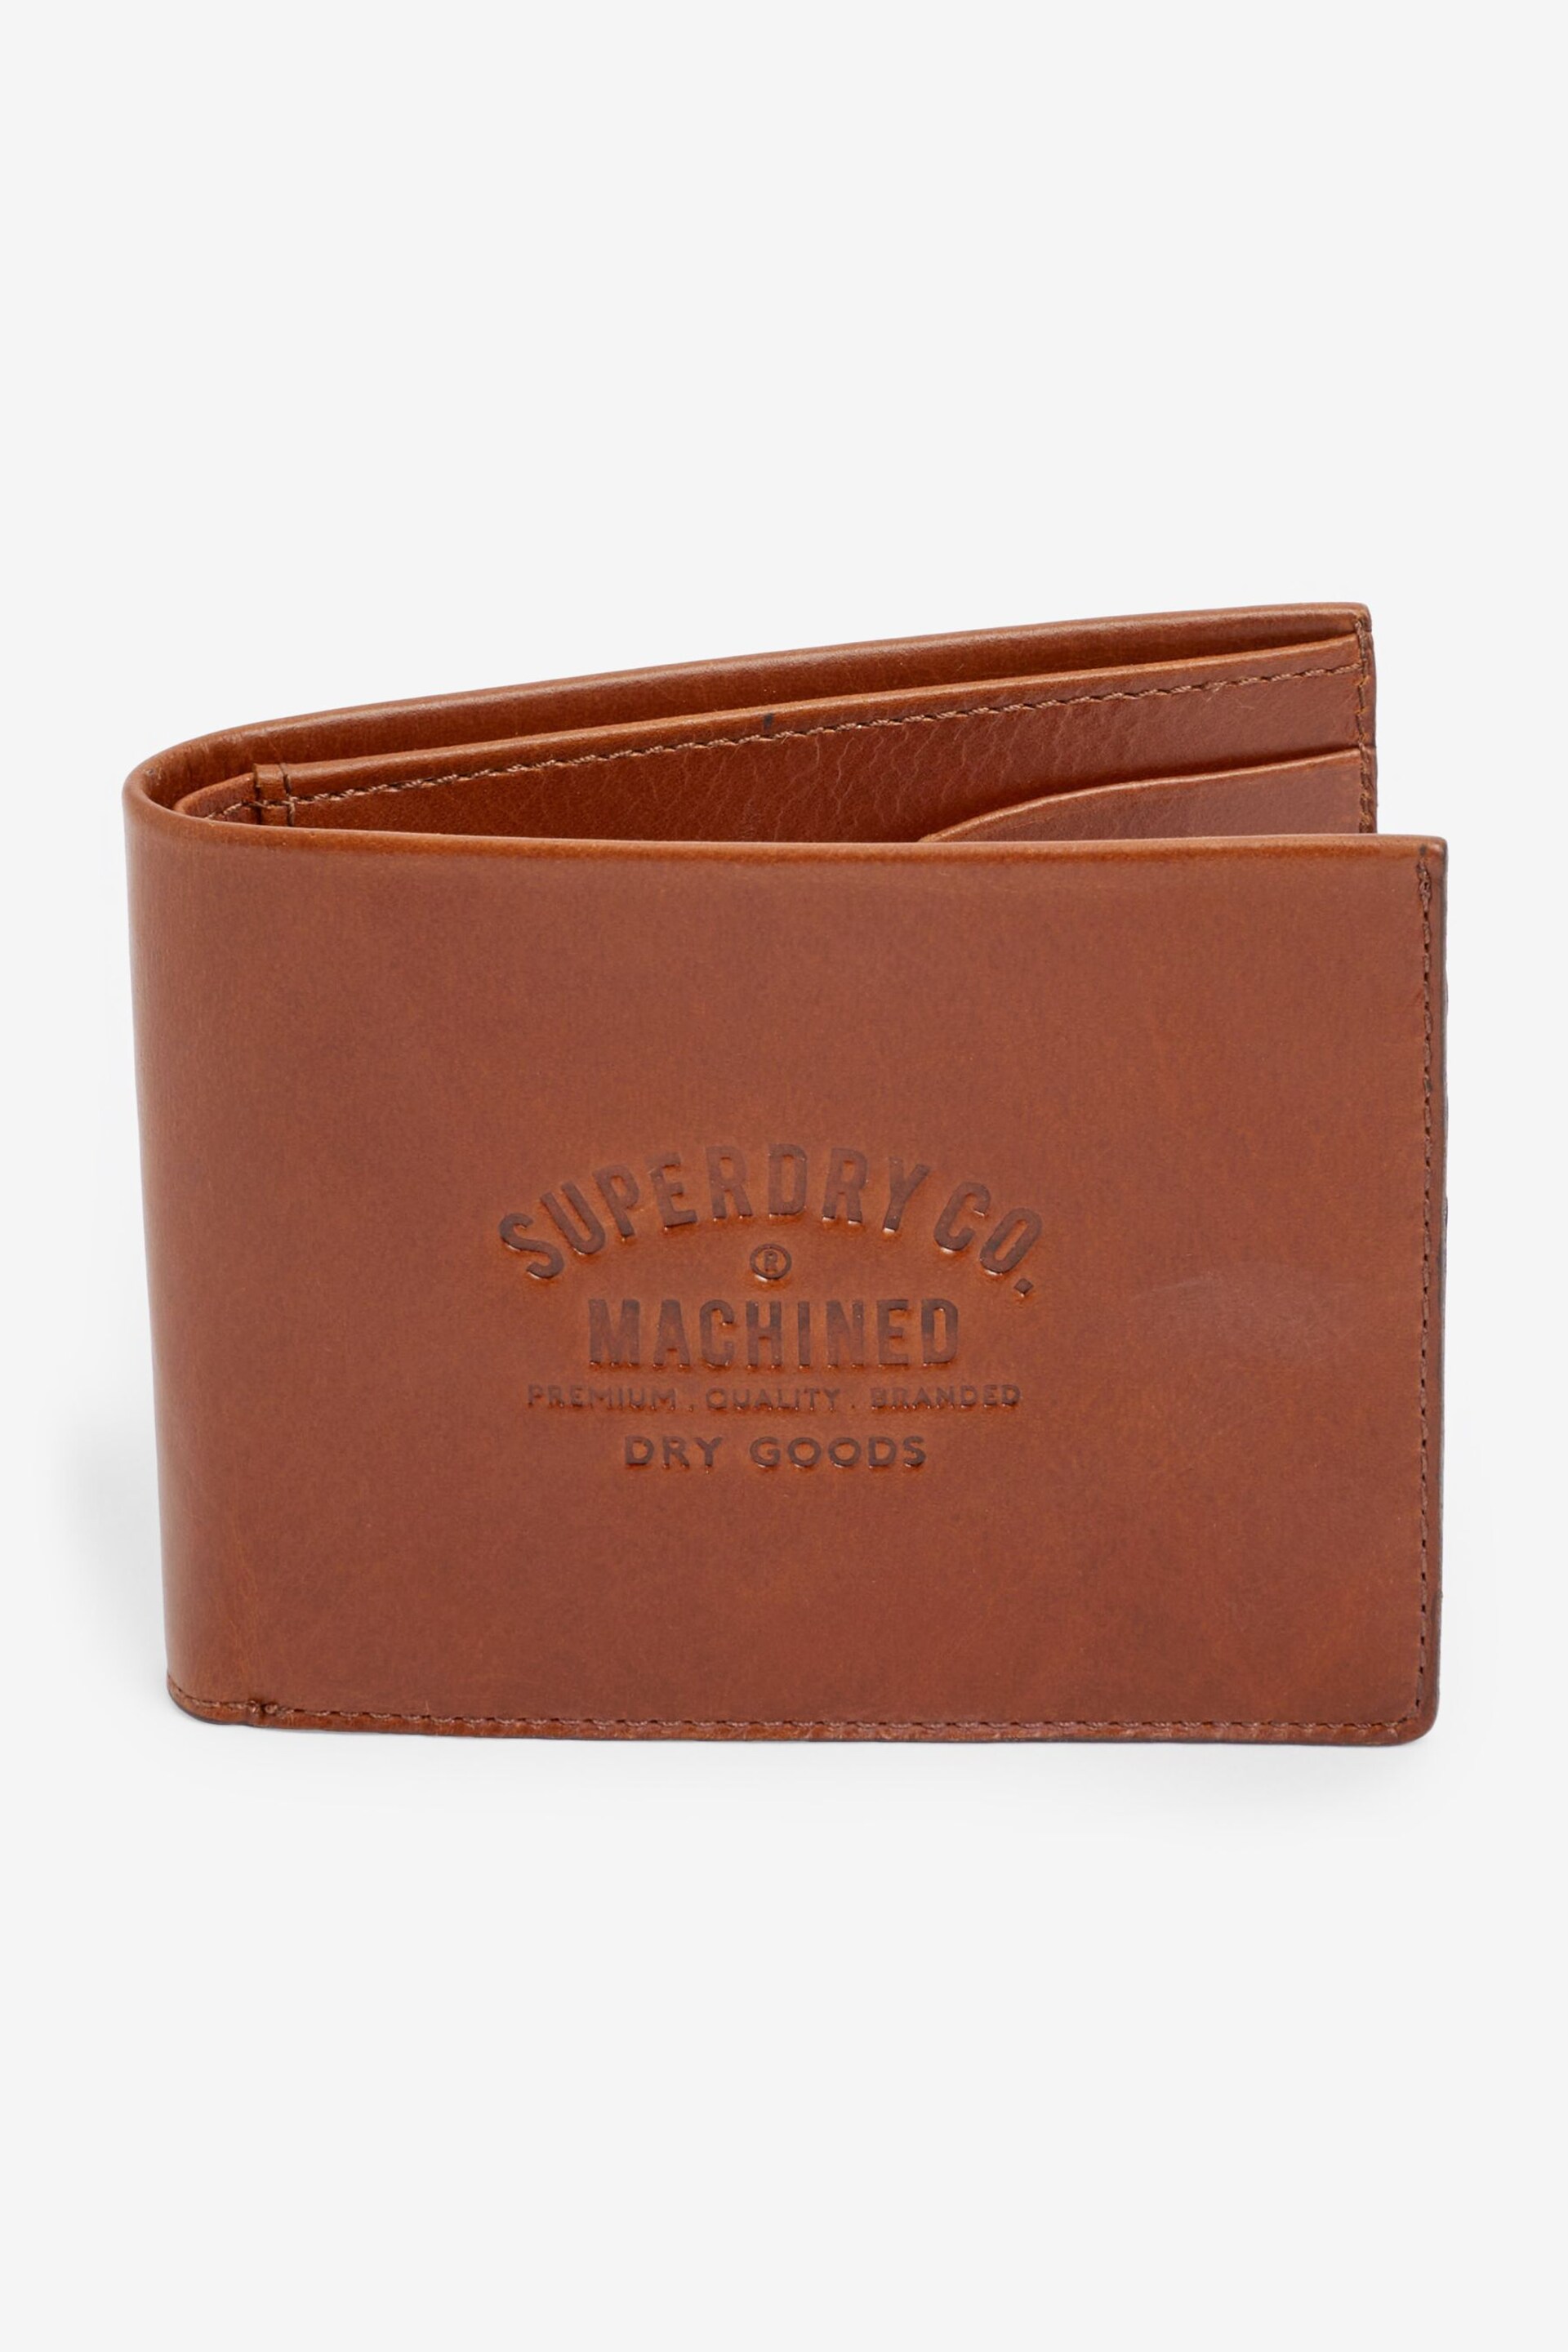 Superdry Brown Leather Wallet In Box - Image 1 of 6